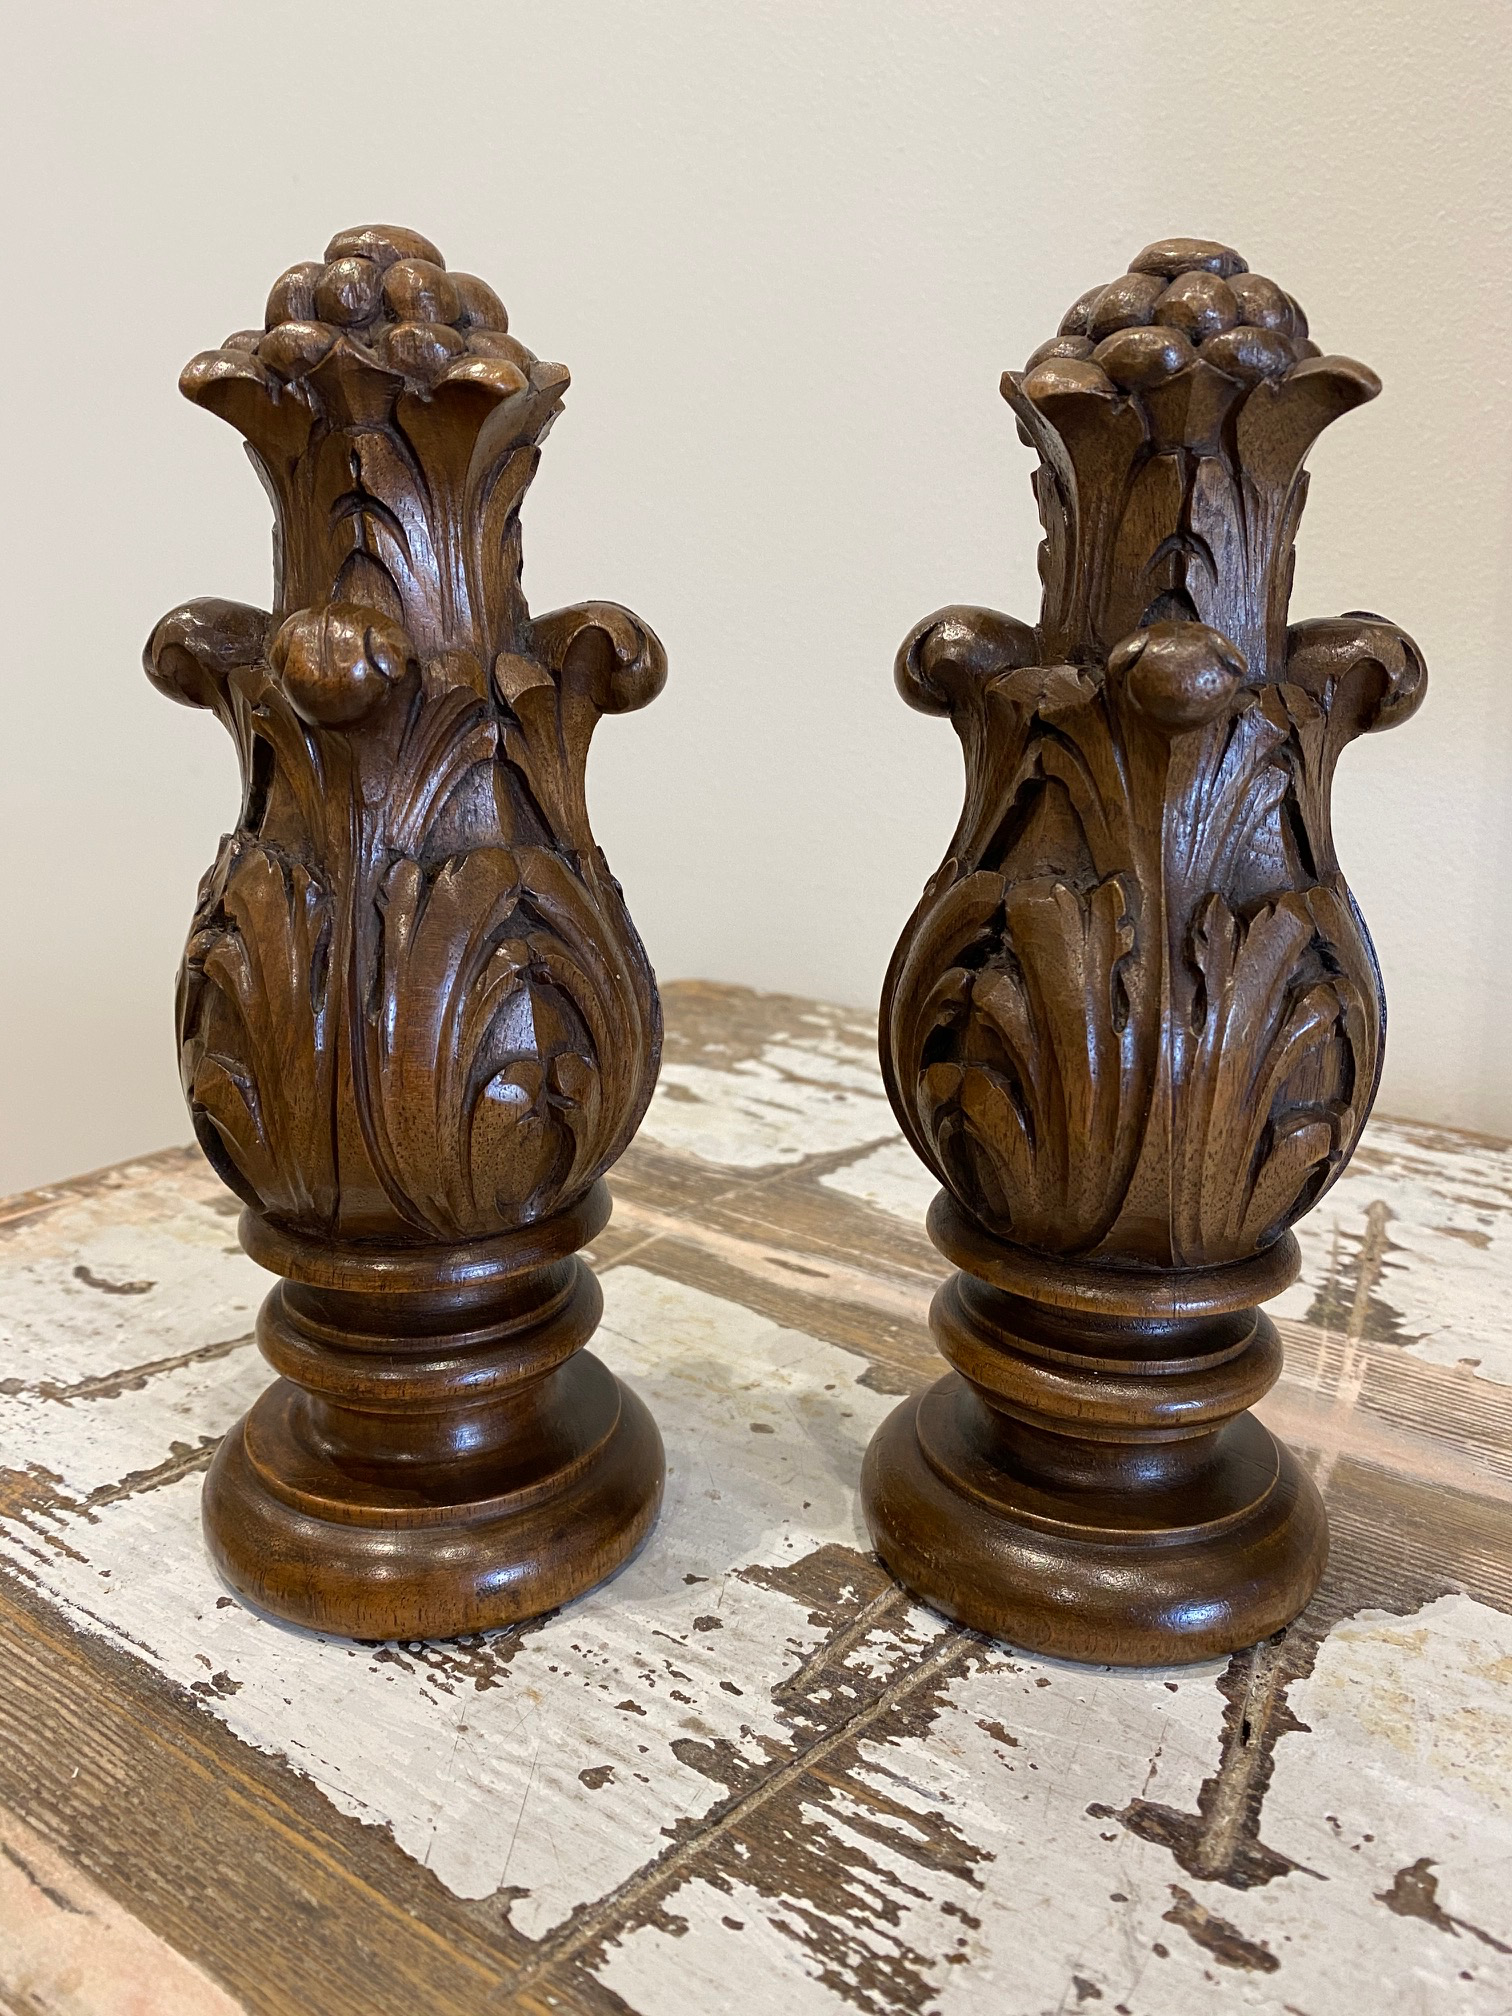 SOLD A pair of beautifully carved curtain-rod finials, French 19th Century